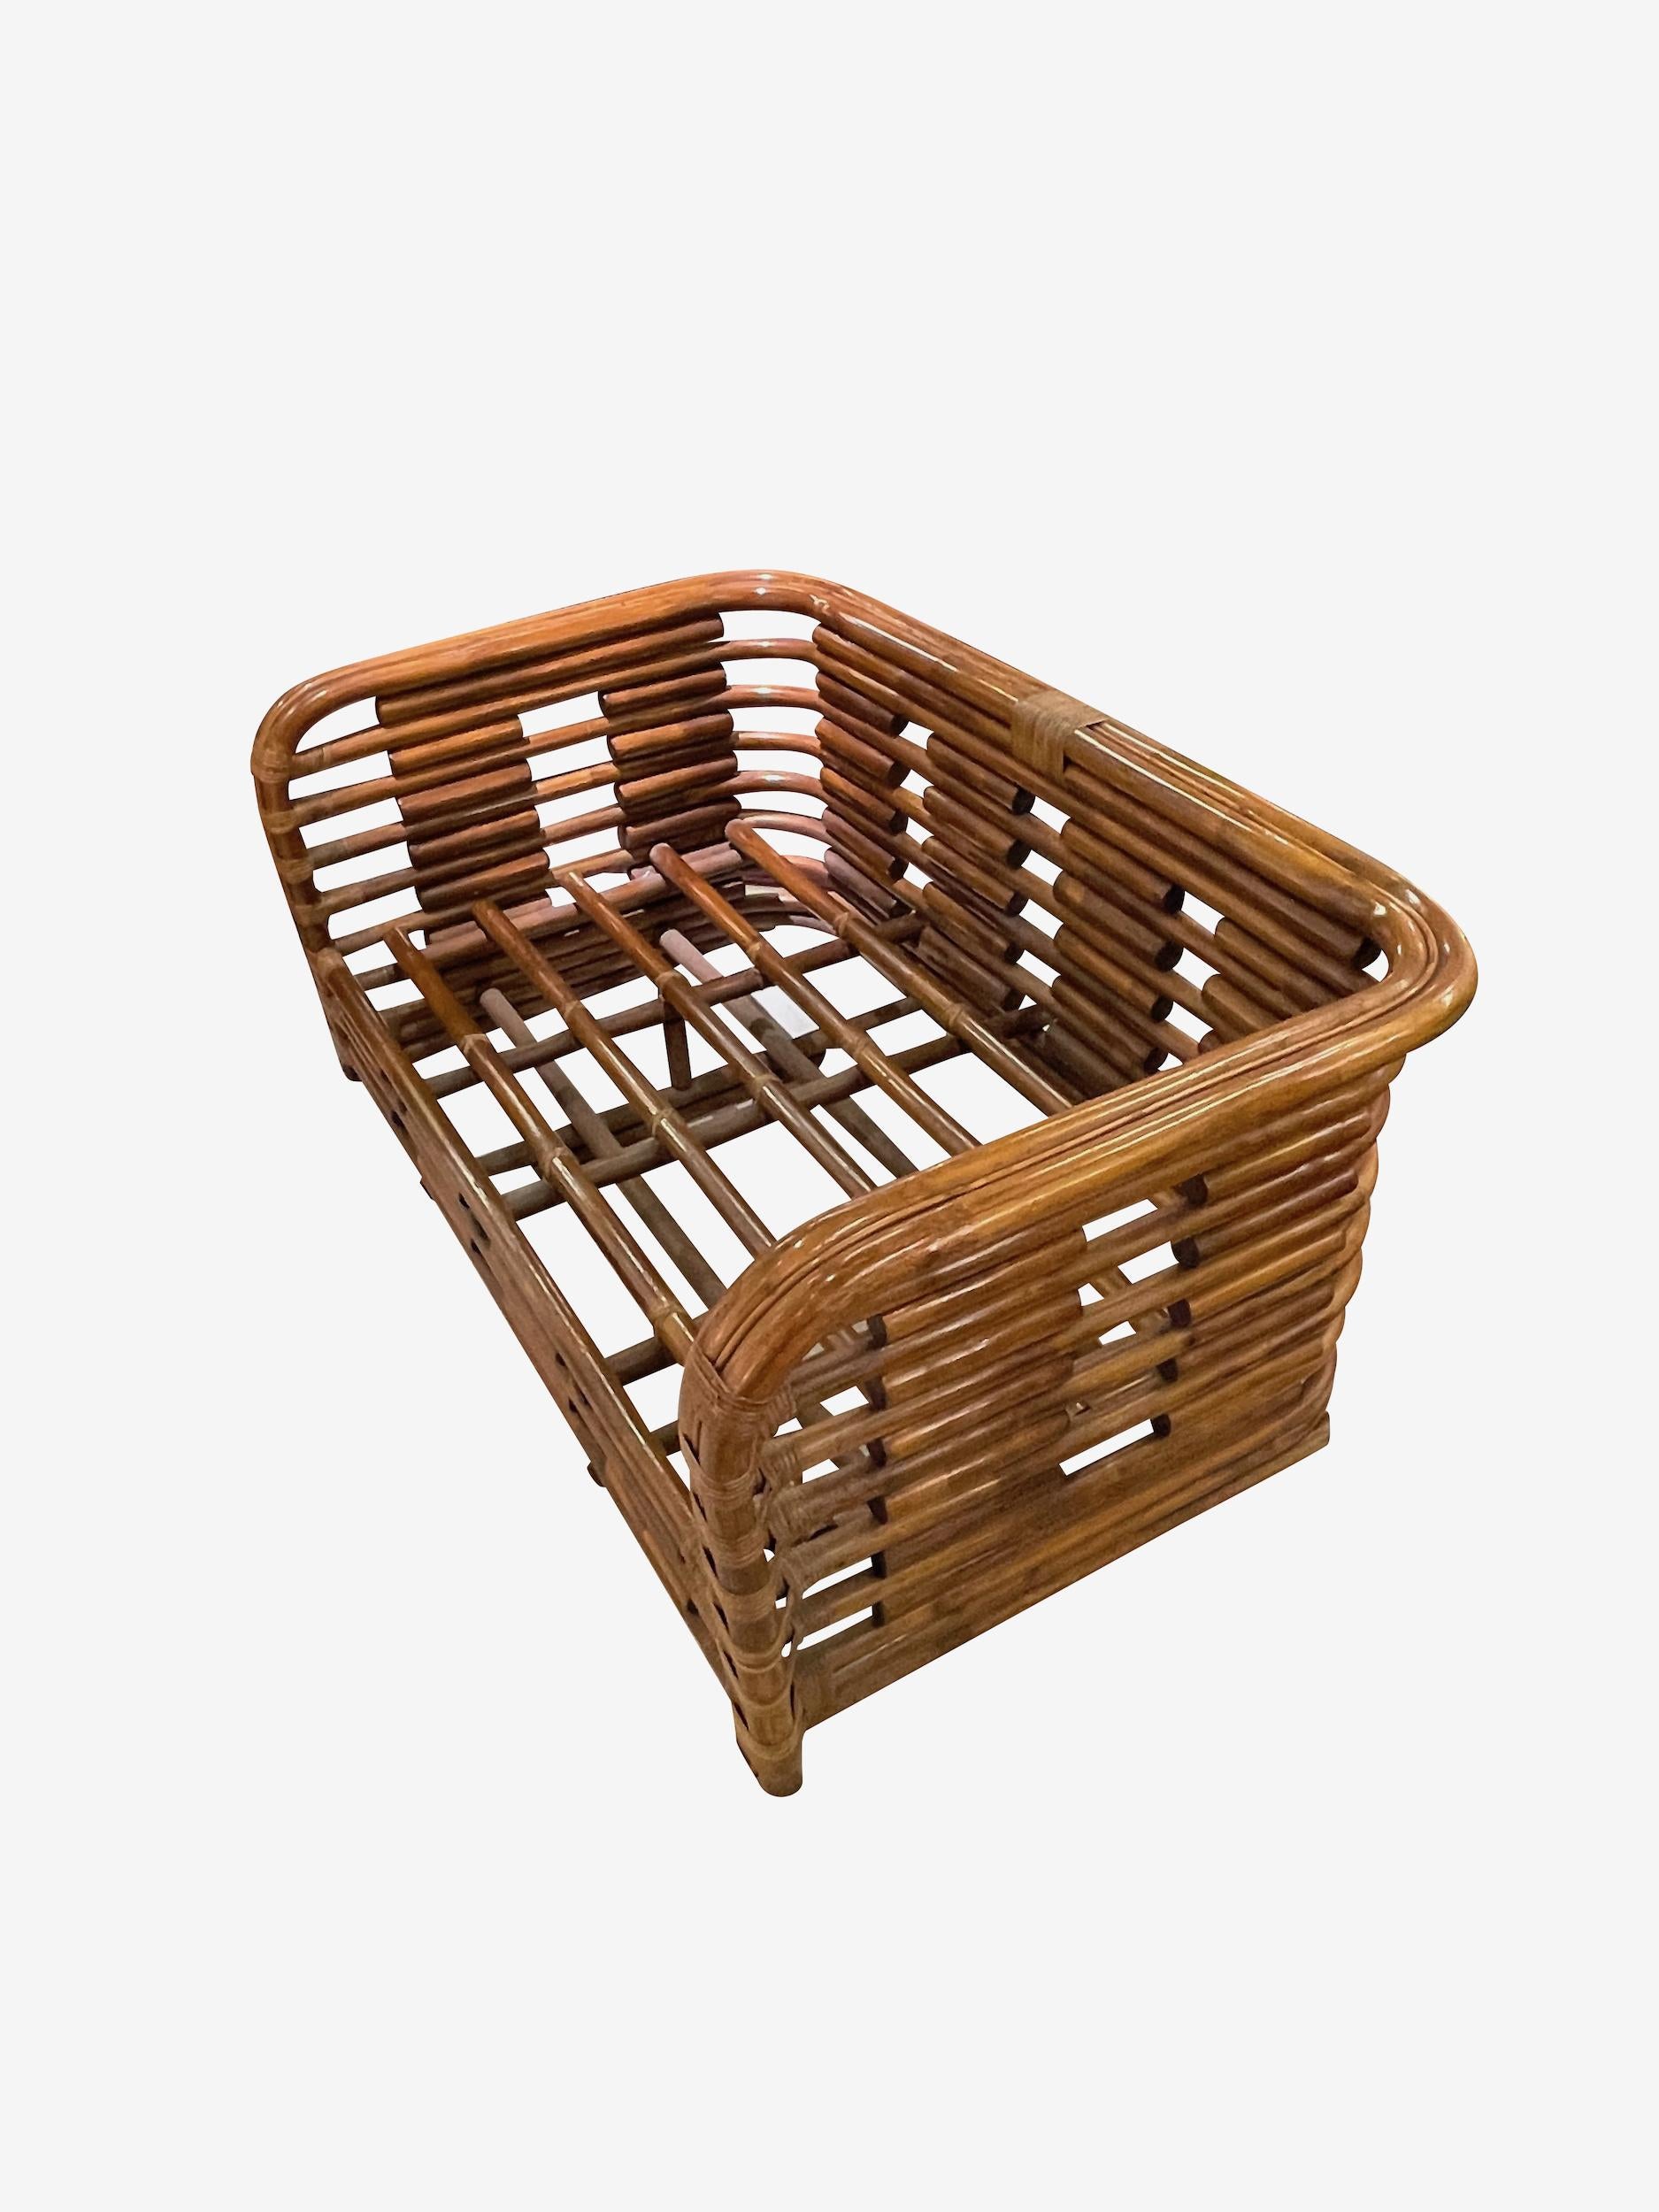 Bamboo Rattan Set of Six Seating Set, France, 1950s For Sale